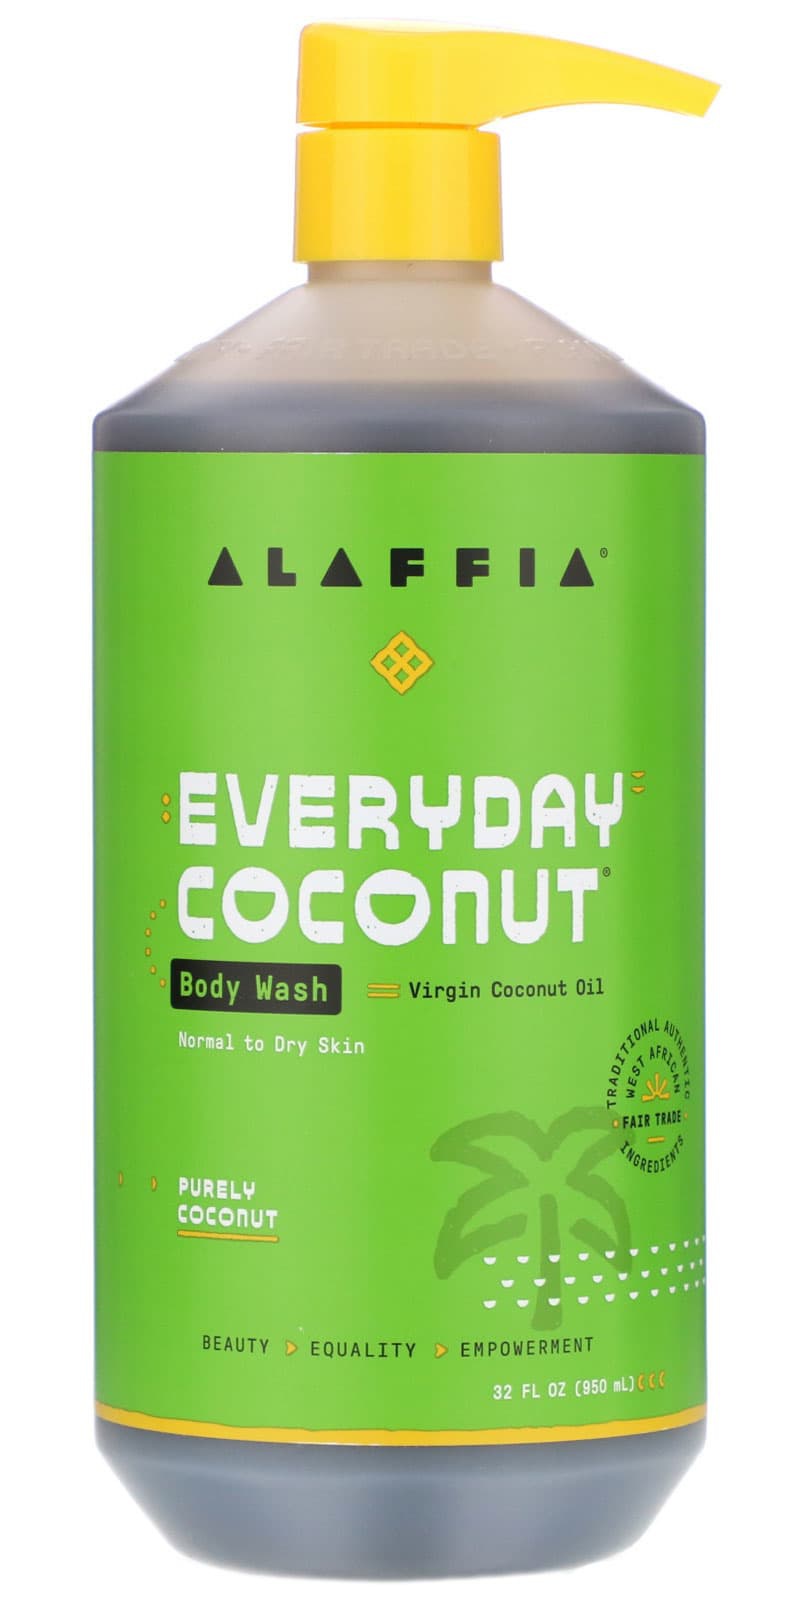 Alaffia Everyday Coconut, Body Wash, Normal To Dry Skin, Purely Coconut